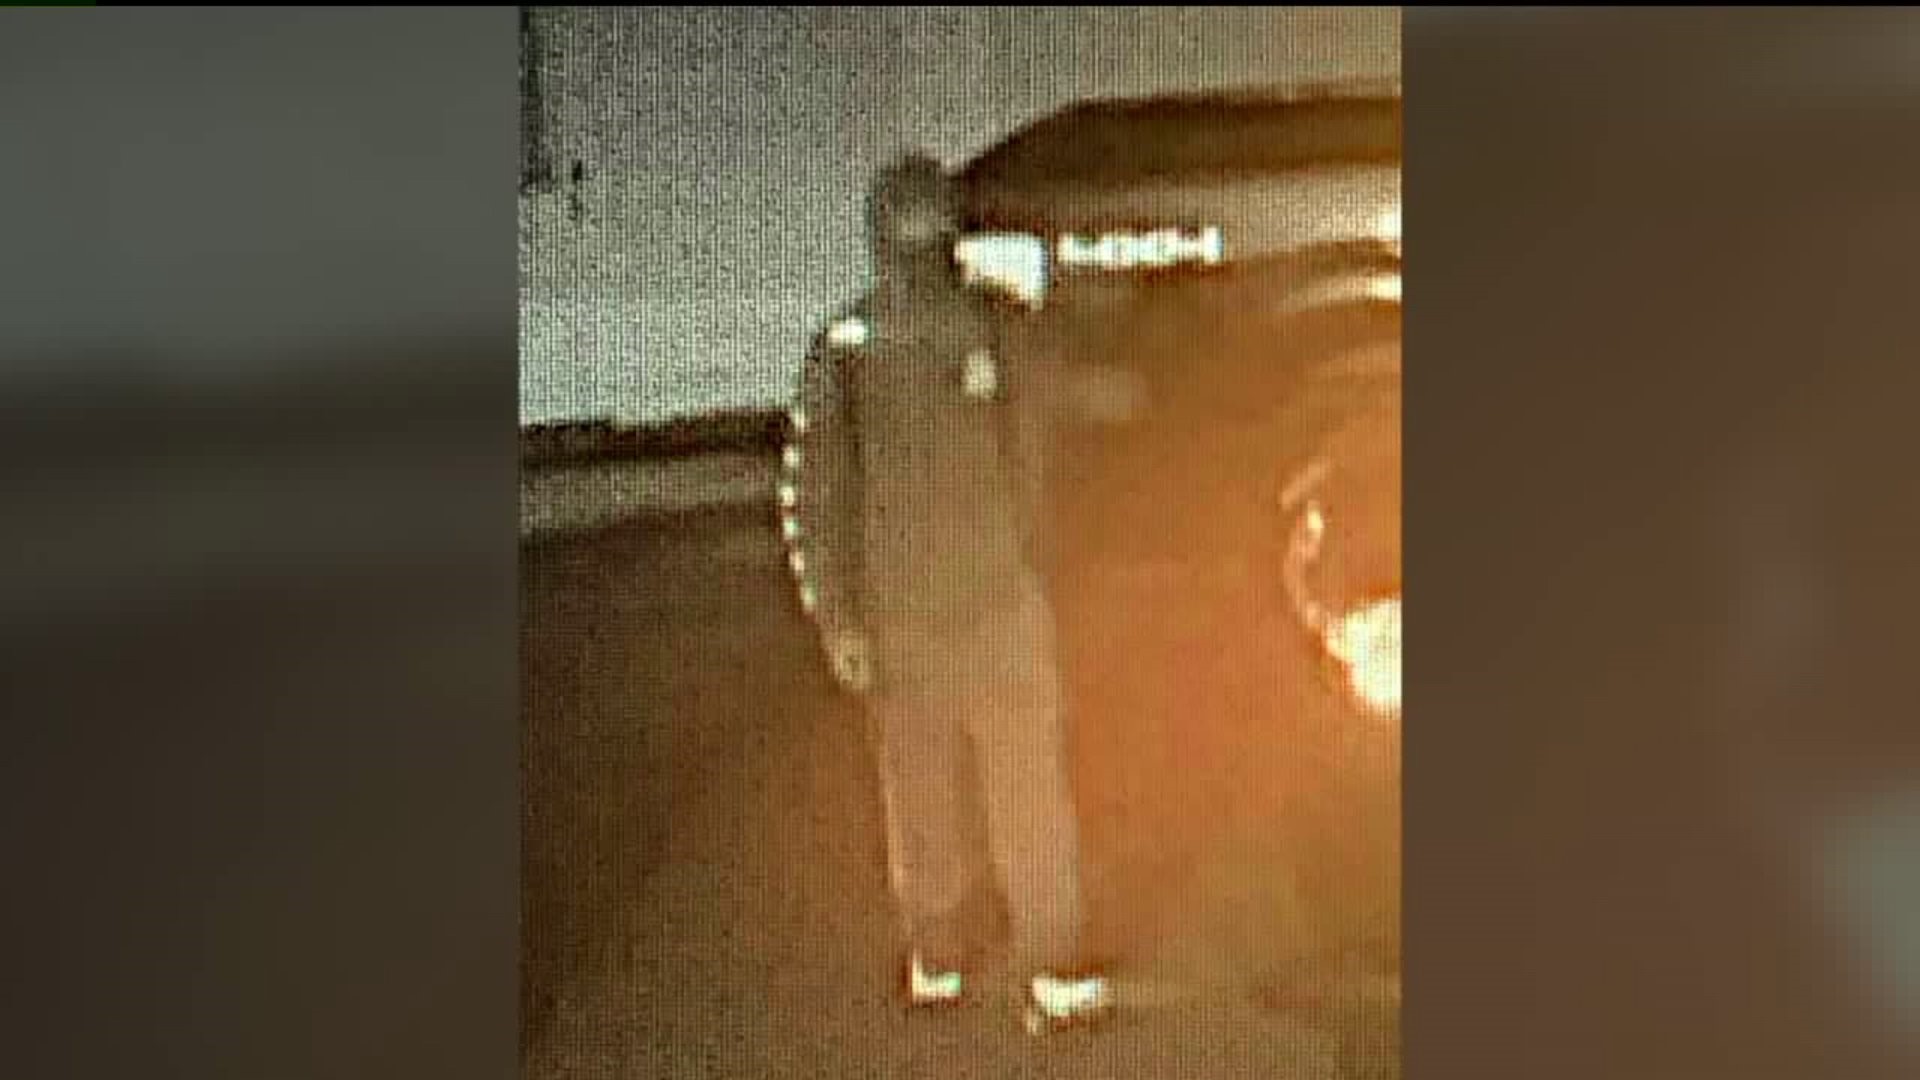 Man Wanted for More than 40 Break-Ins in Kingston